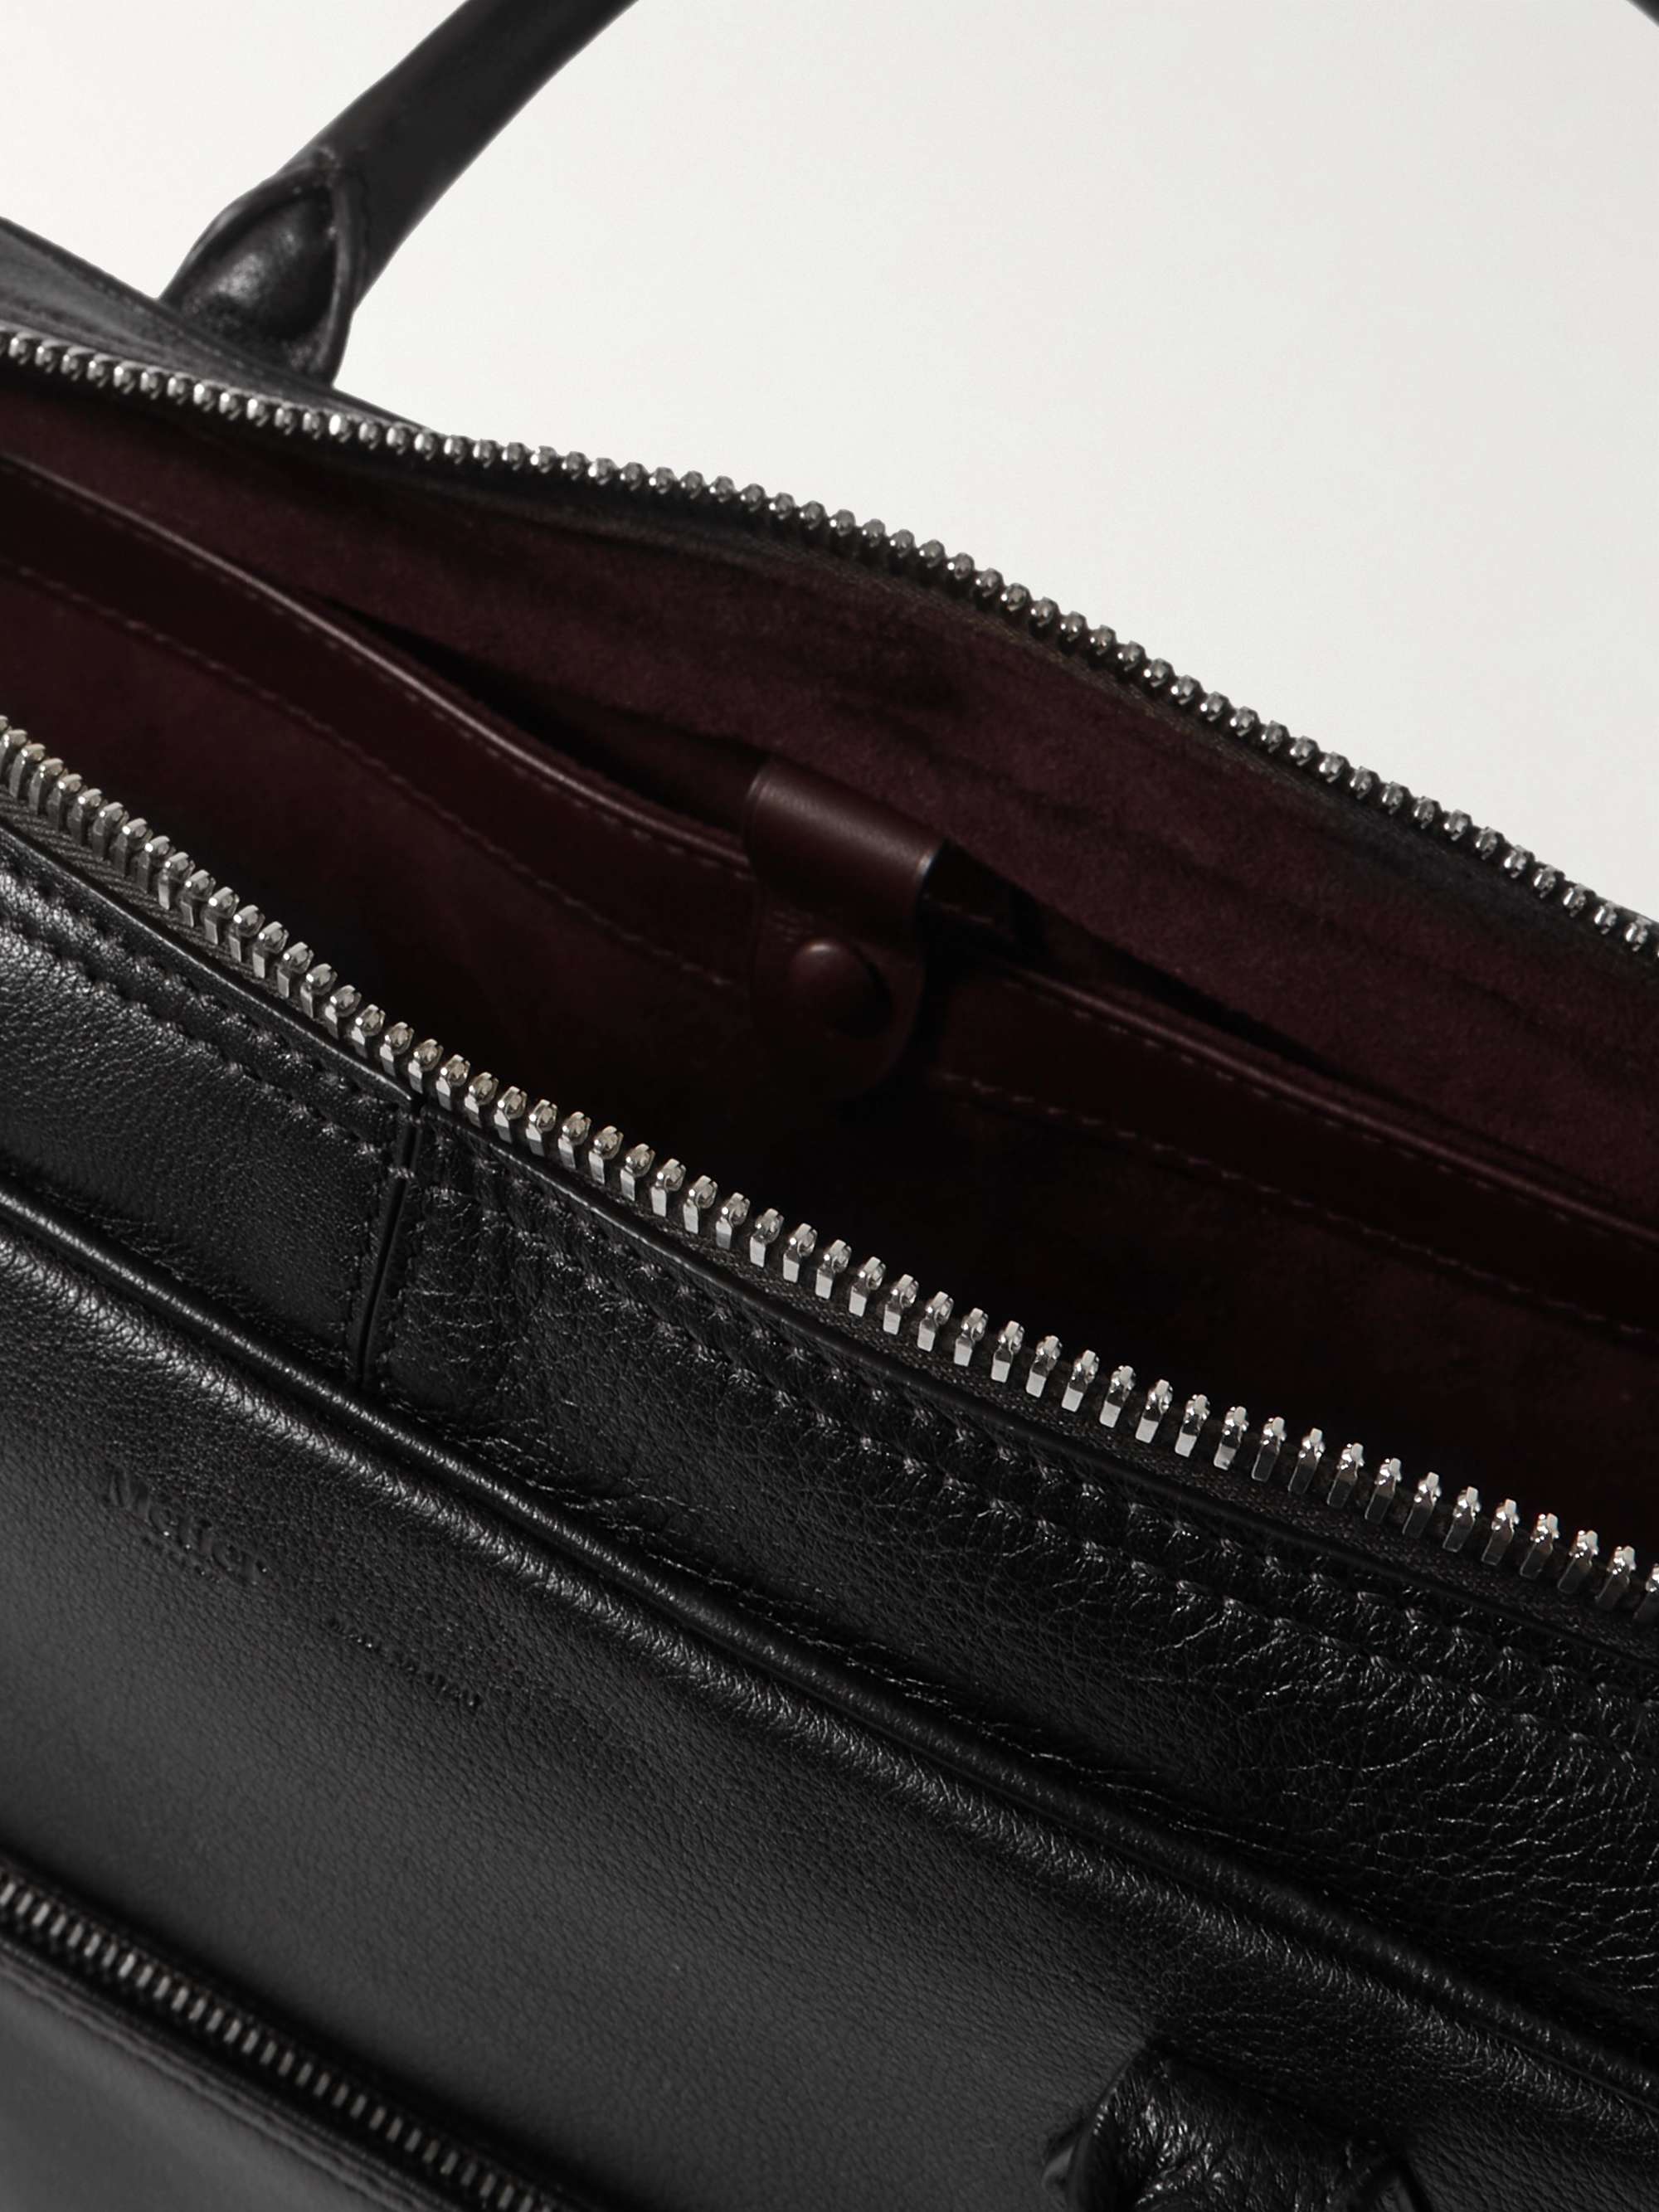 MÉTIER Closer All Day Full-Grain Leather Briefcase